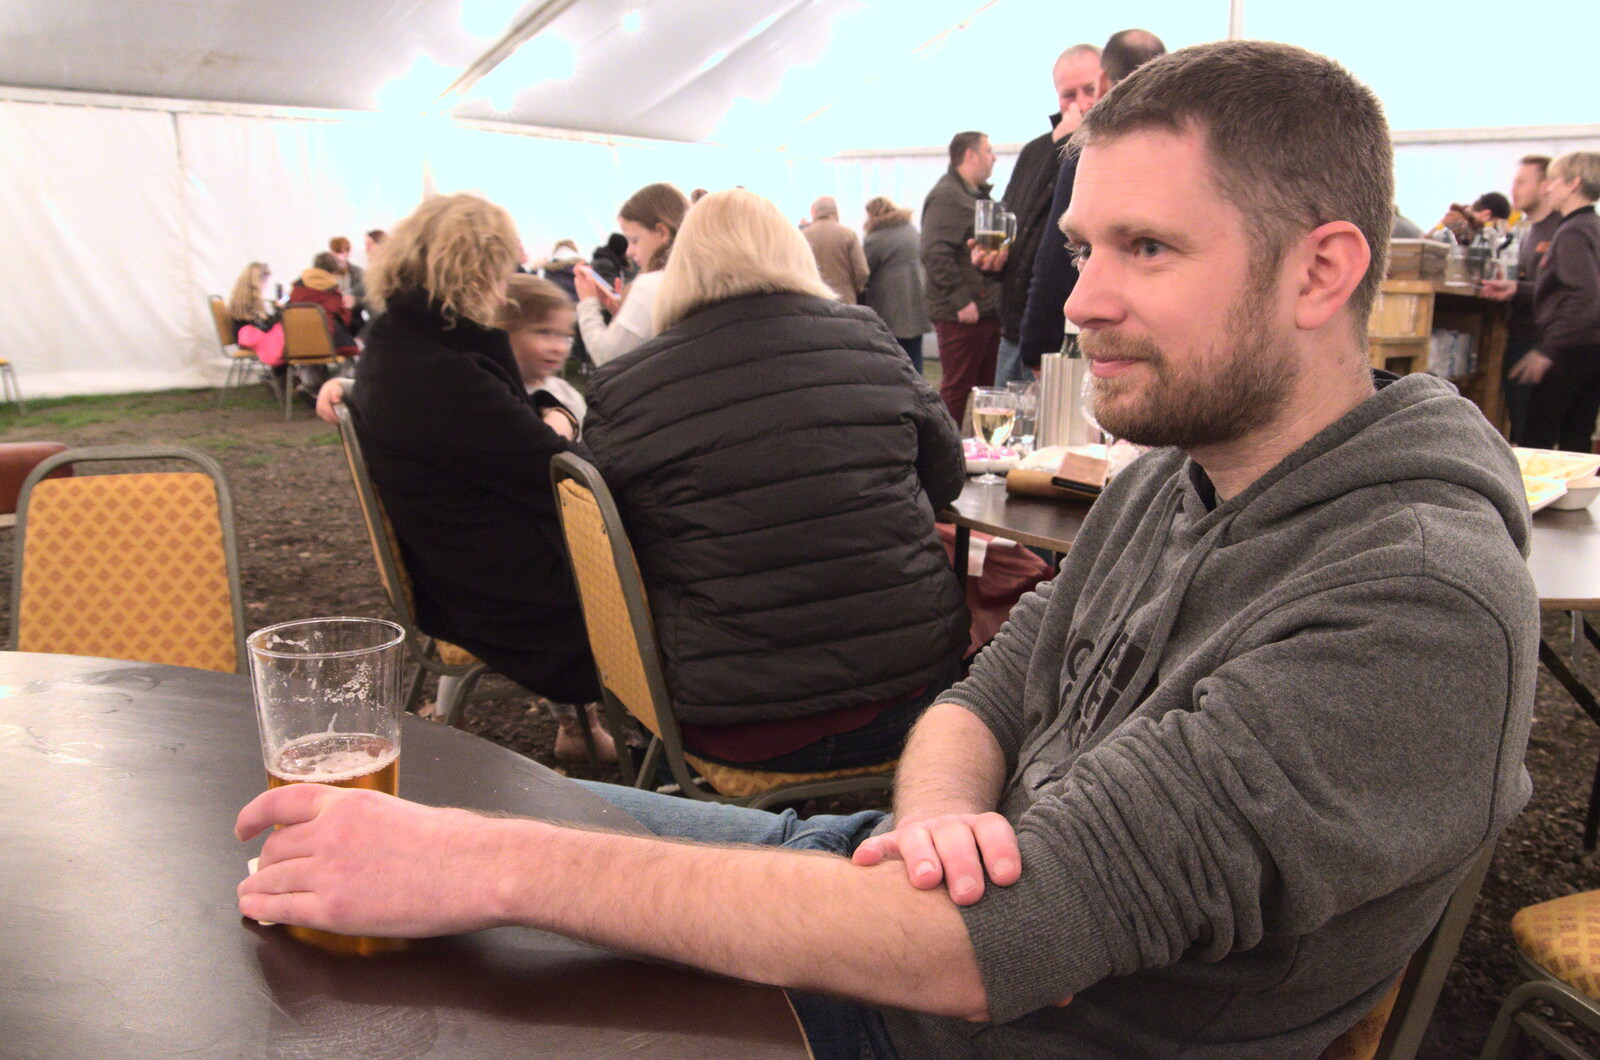 The Boy Phil from The Star Wing Winter Beer Fest, Redgrave, Suffolk - 31st January 2020